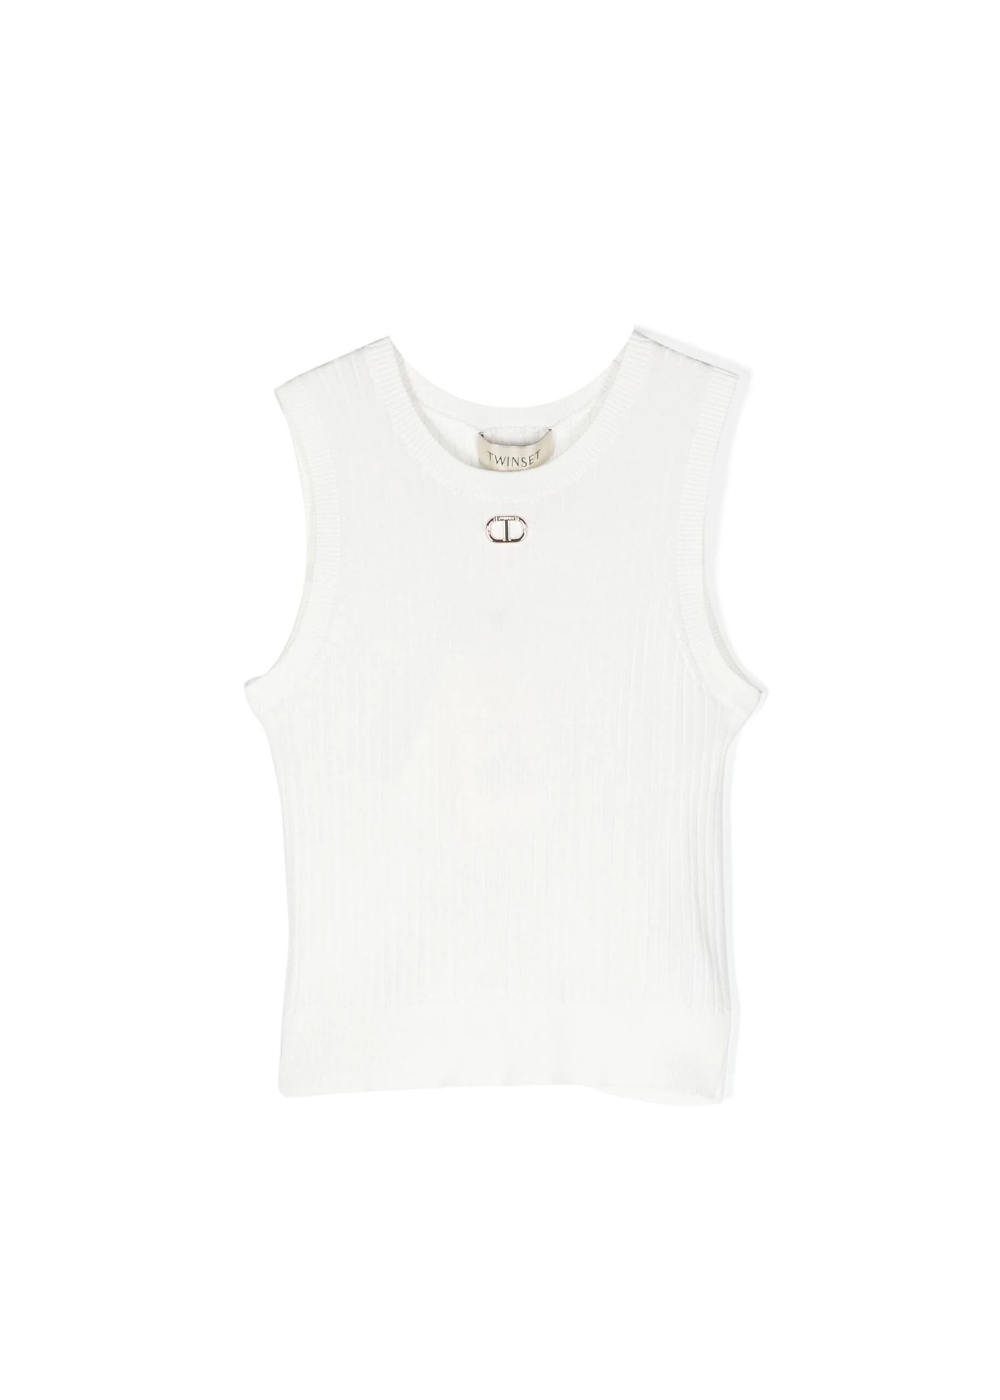 Featured image for “TwinSet Top con logo Oval T”